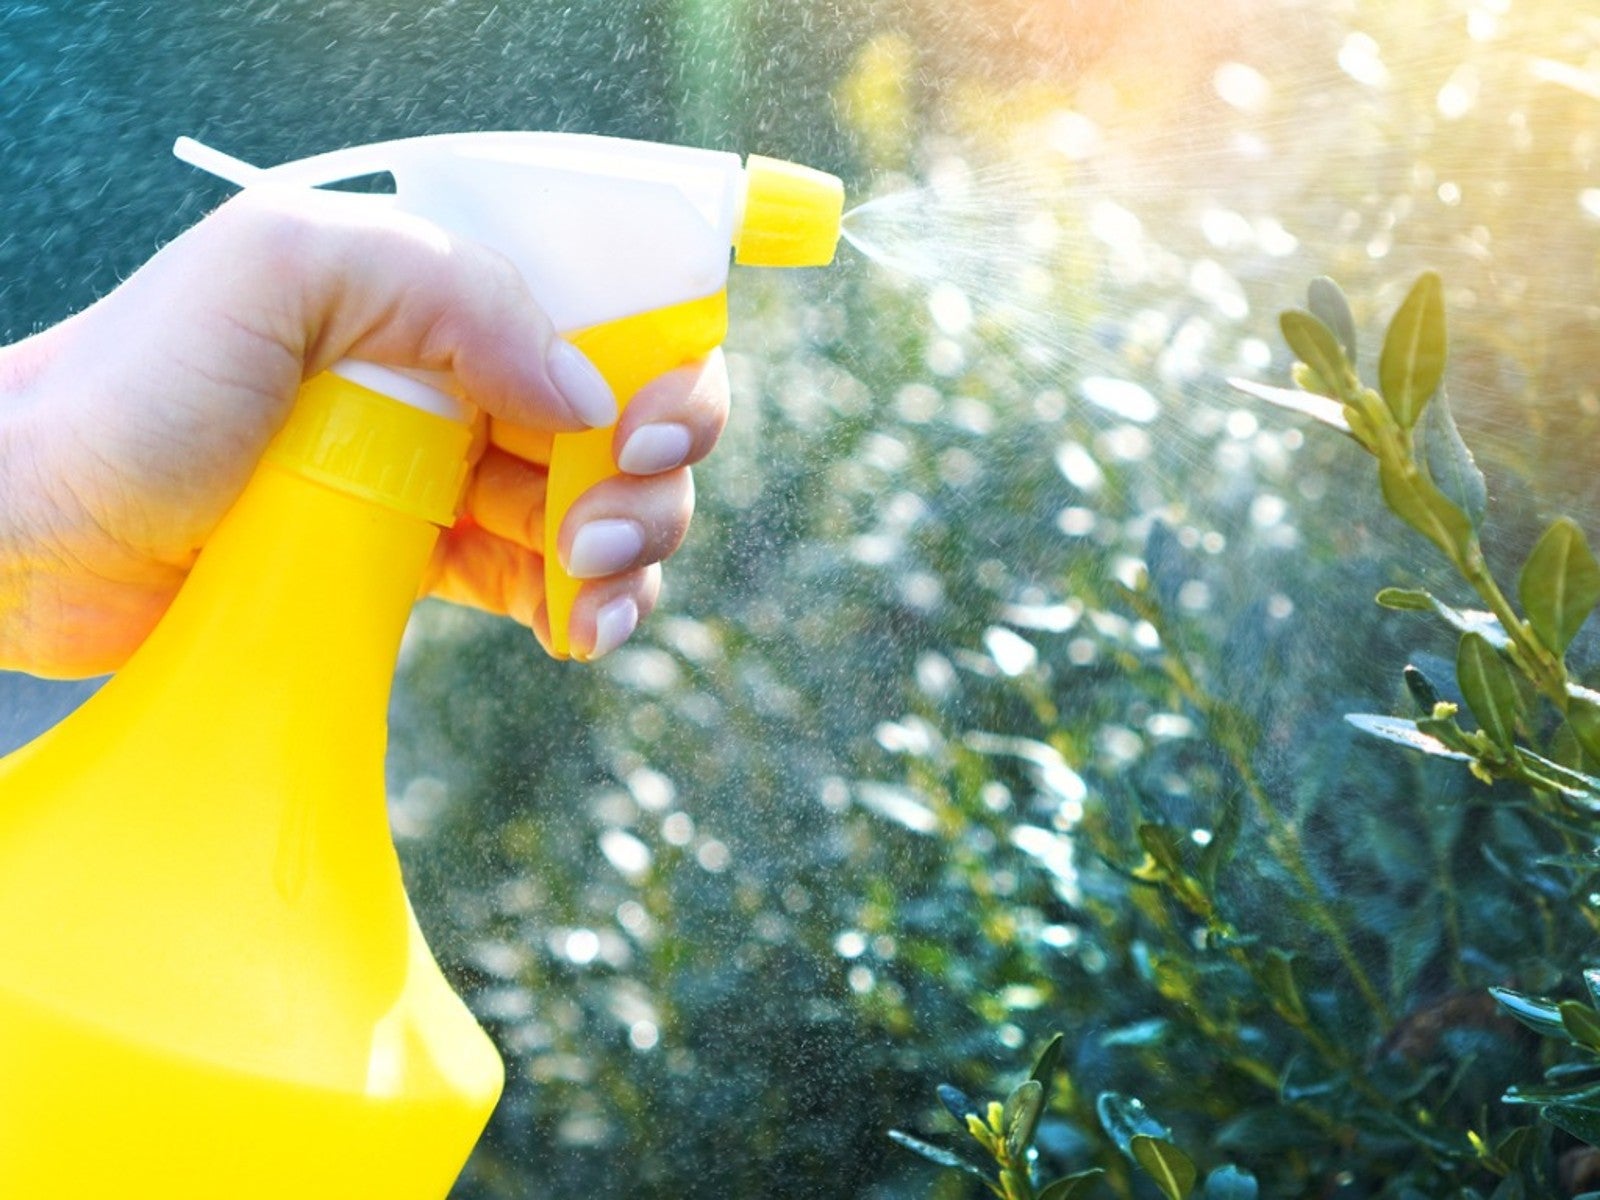 A hand spraying a plant with a yellow bottle